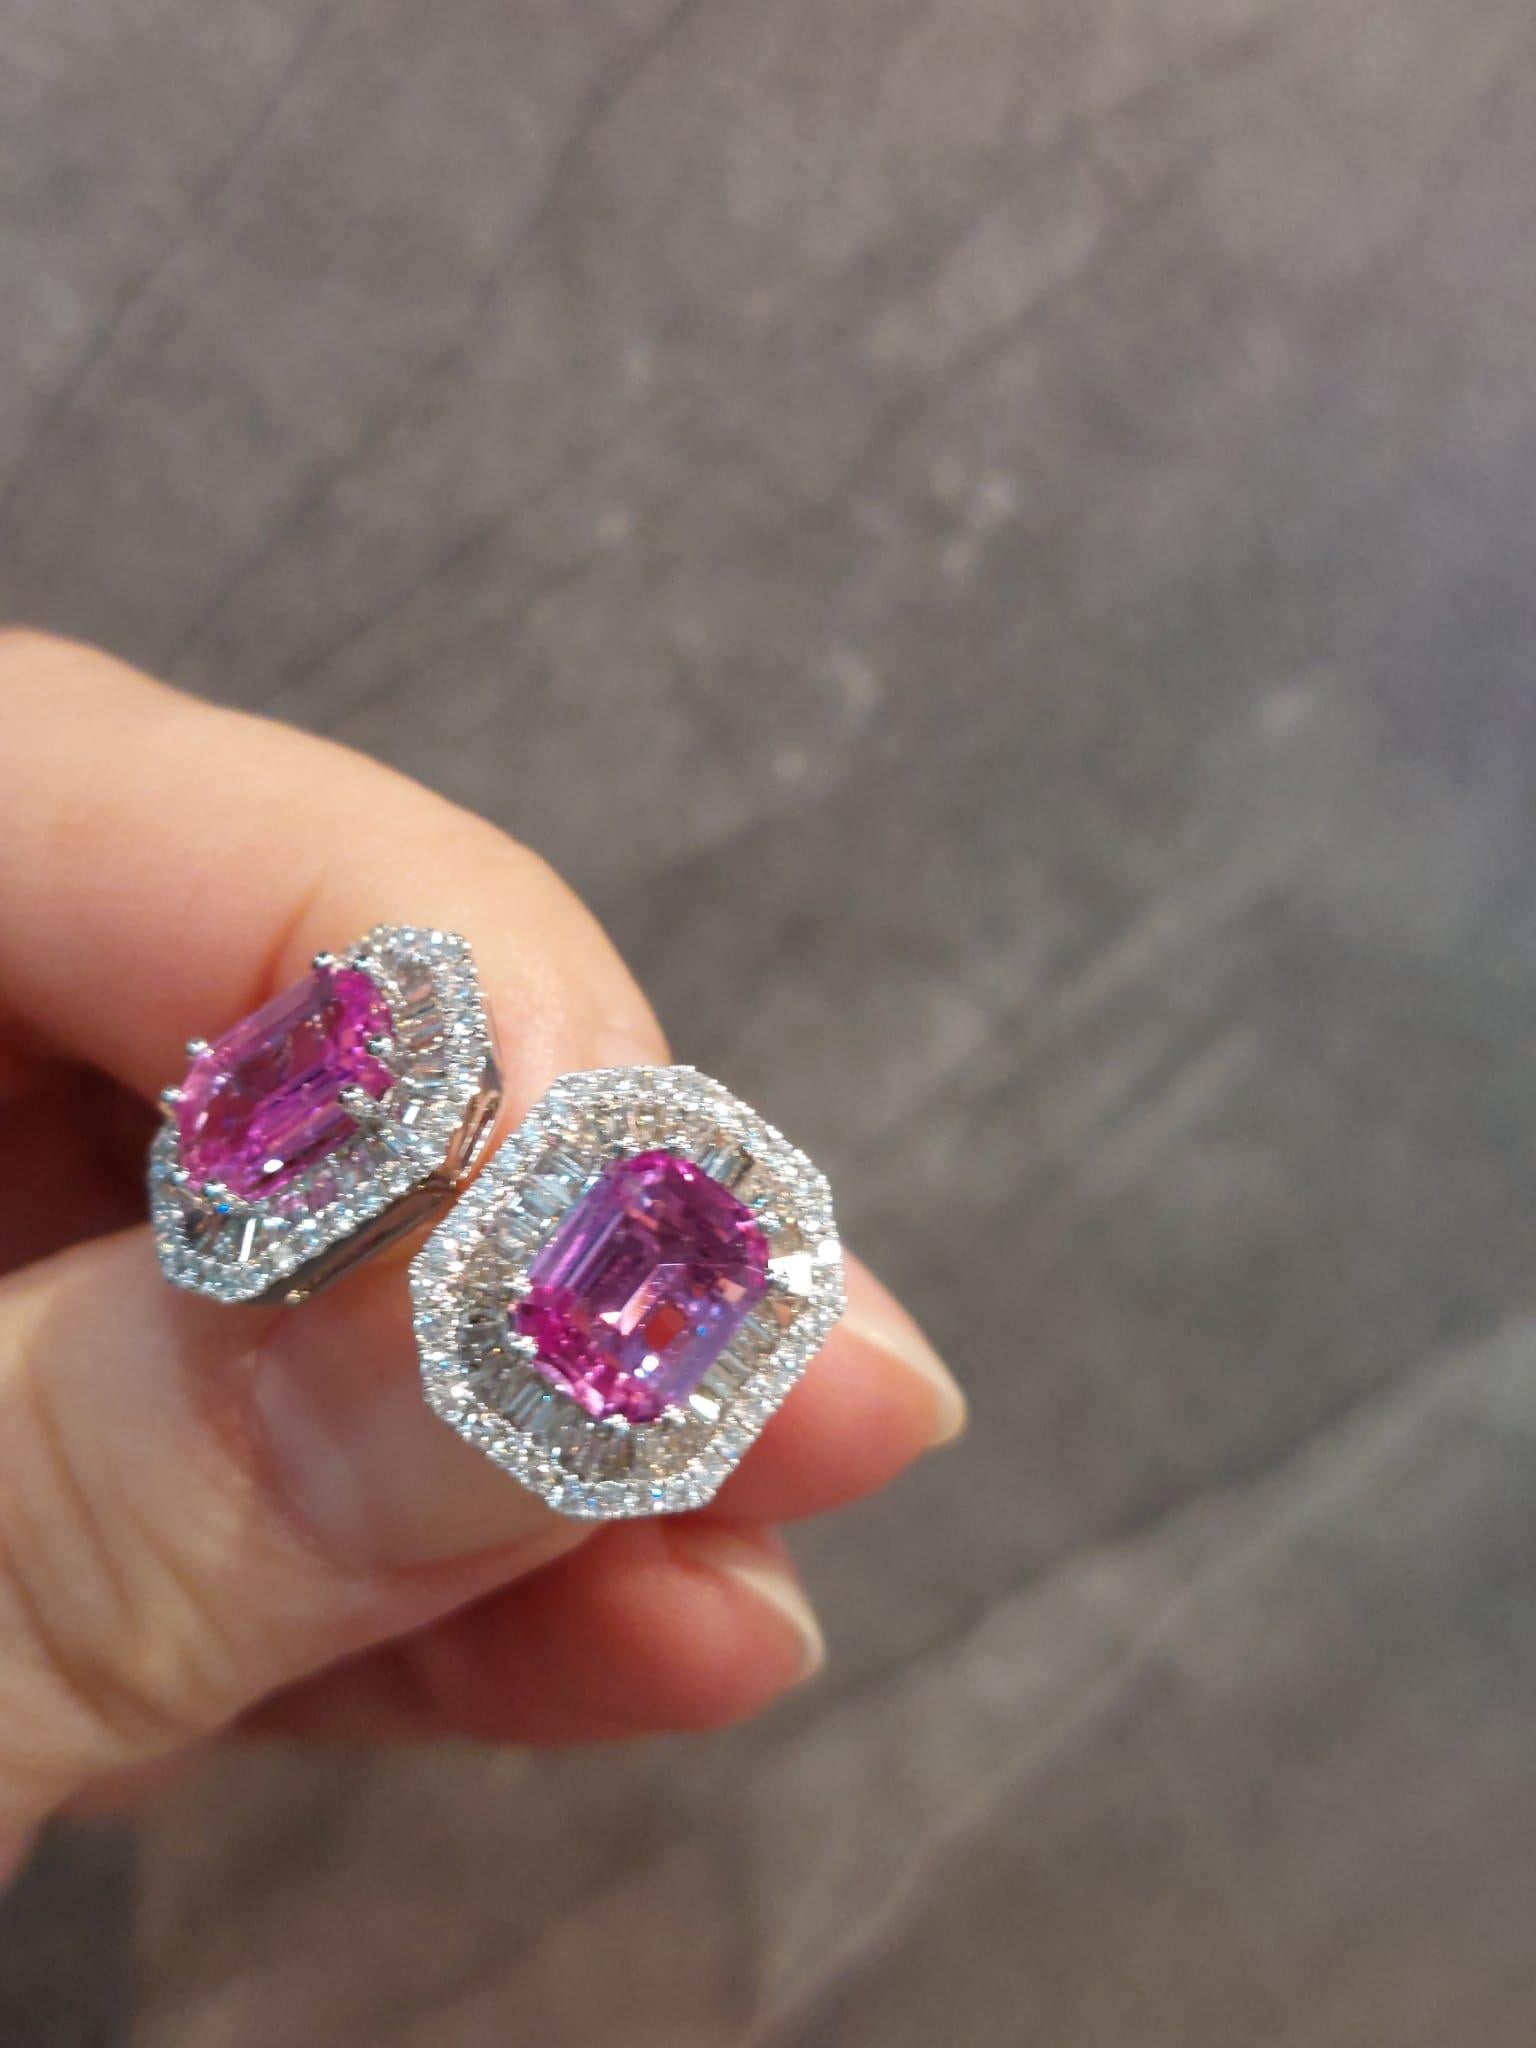 GILIN 18K White Gold Diamond Earring with Pink Sapphire For Sale 1